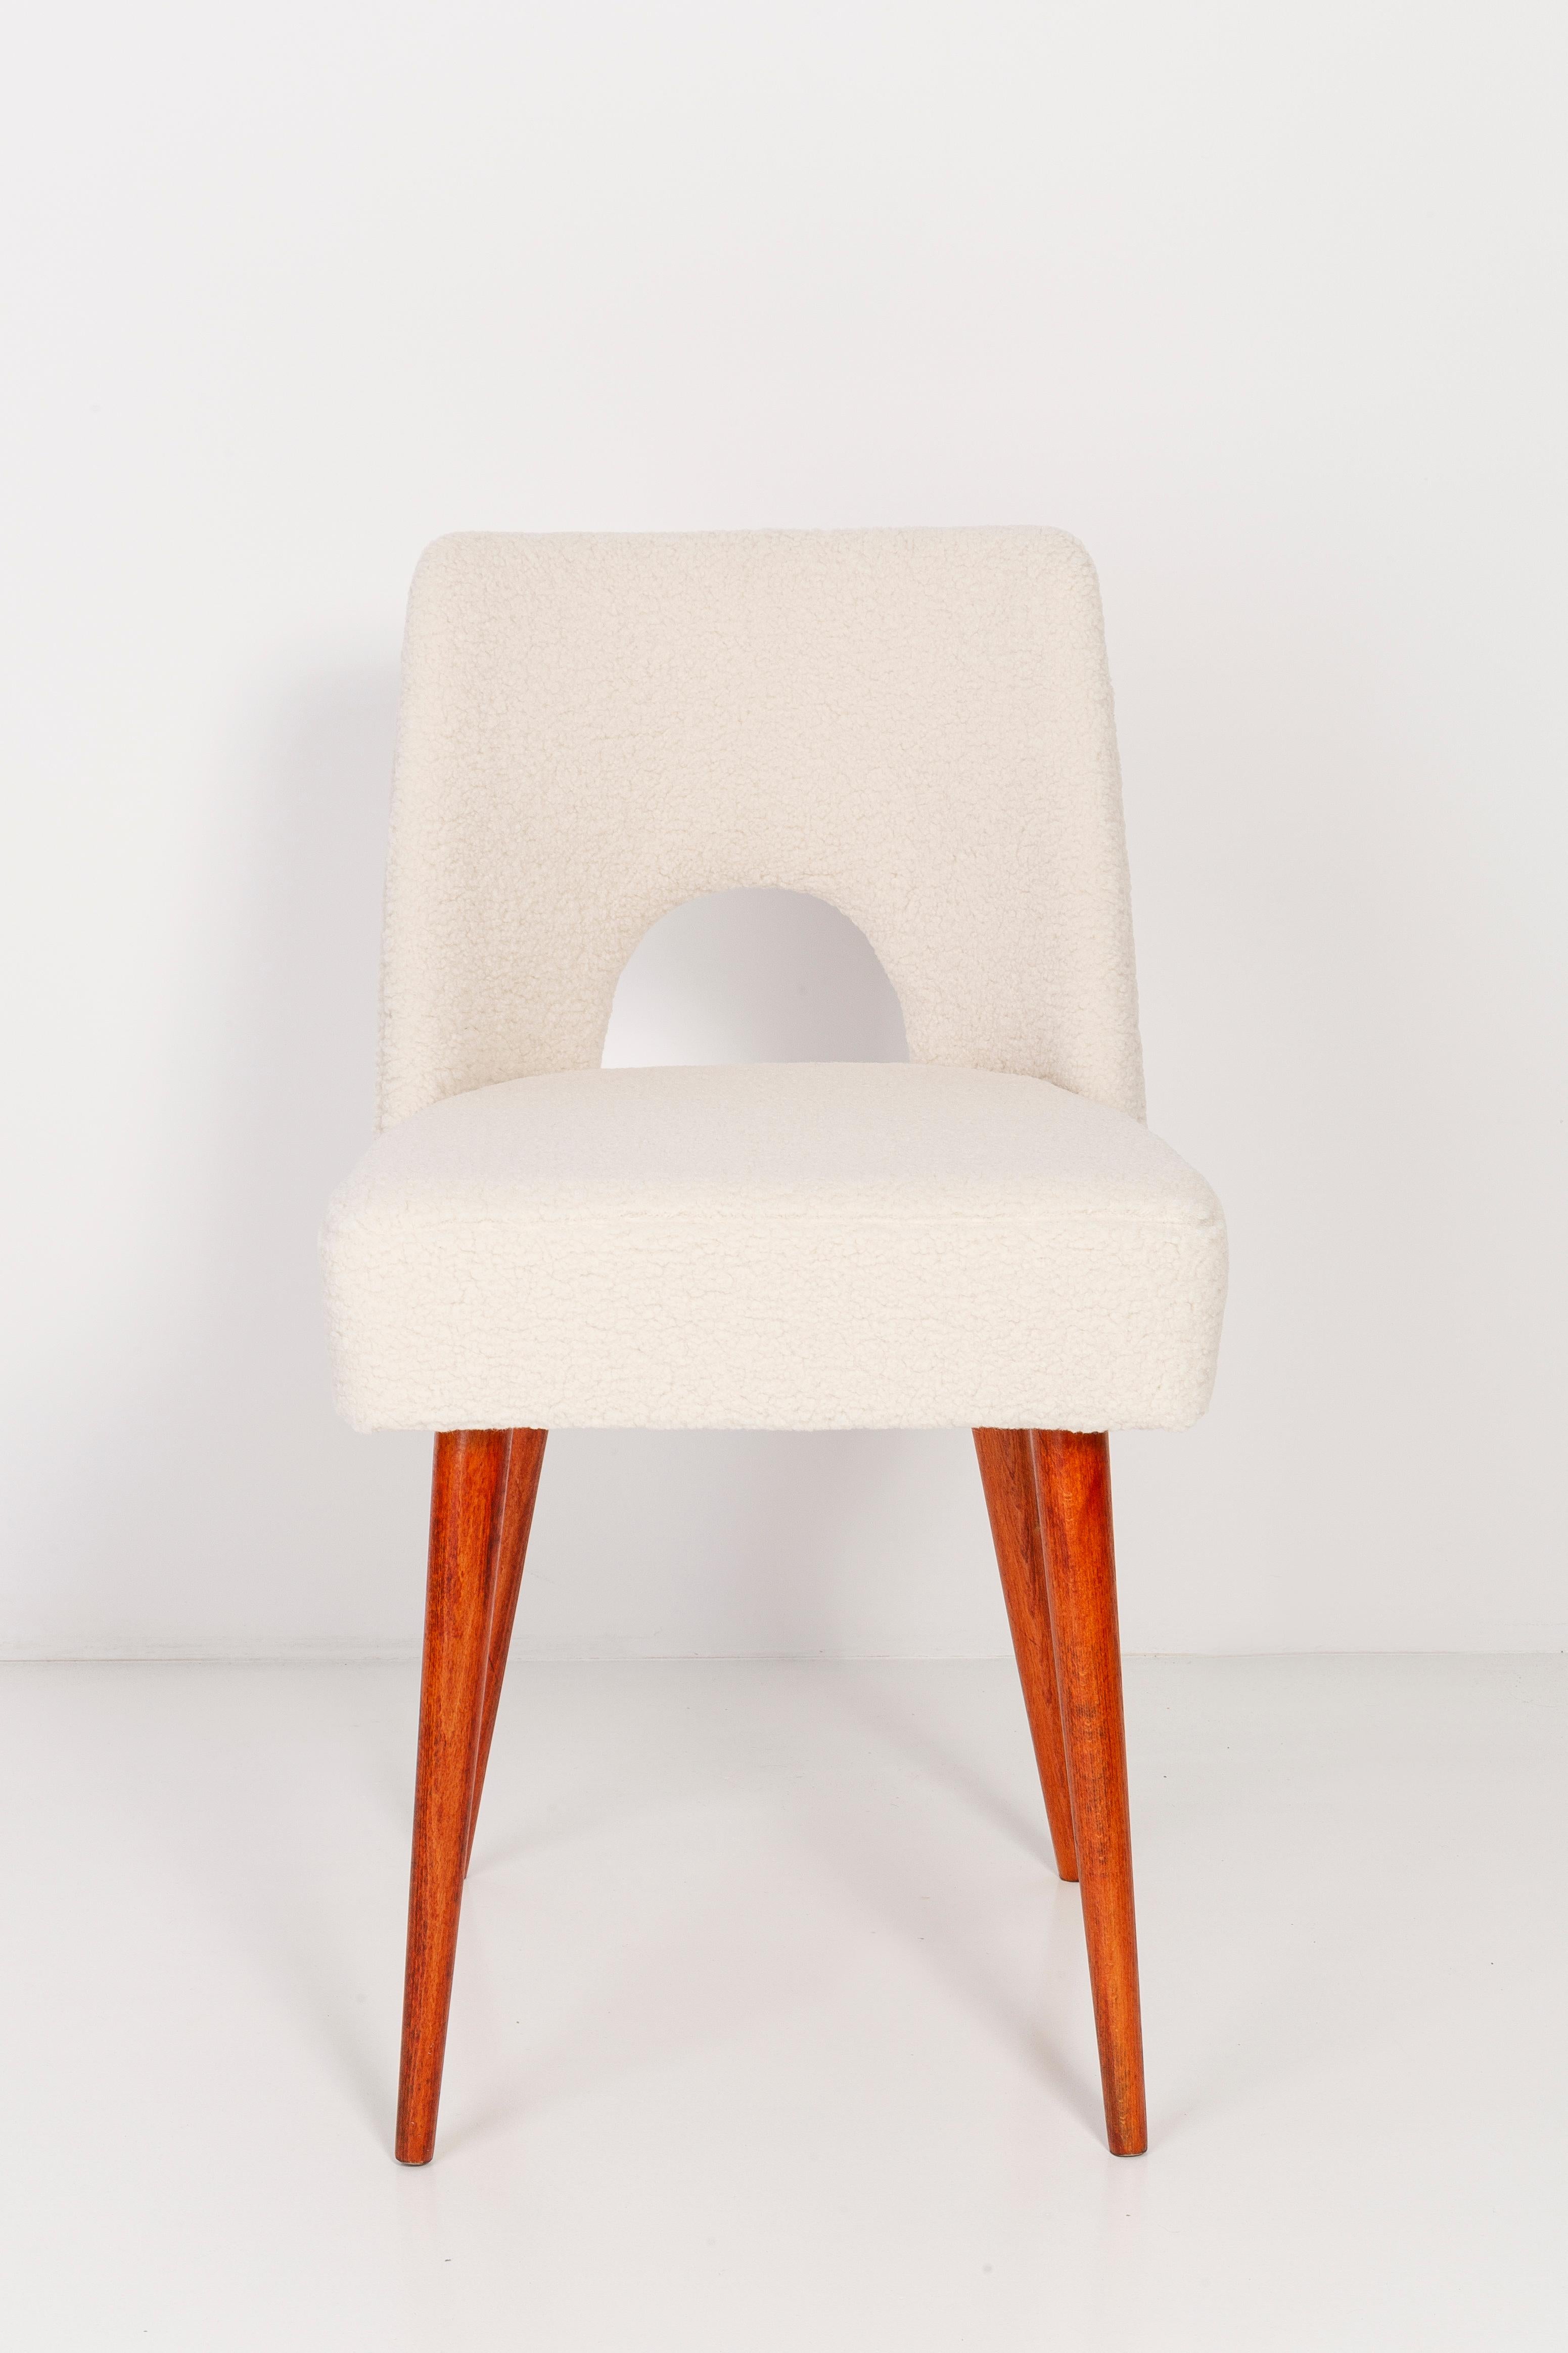 Polish Set of Two Light Crème Boucle 'Shell' Chairs, 1960s For Sale